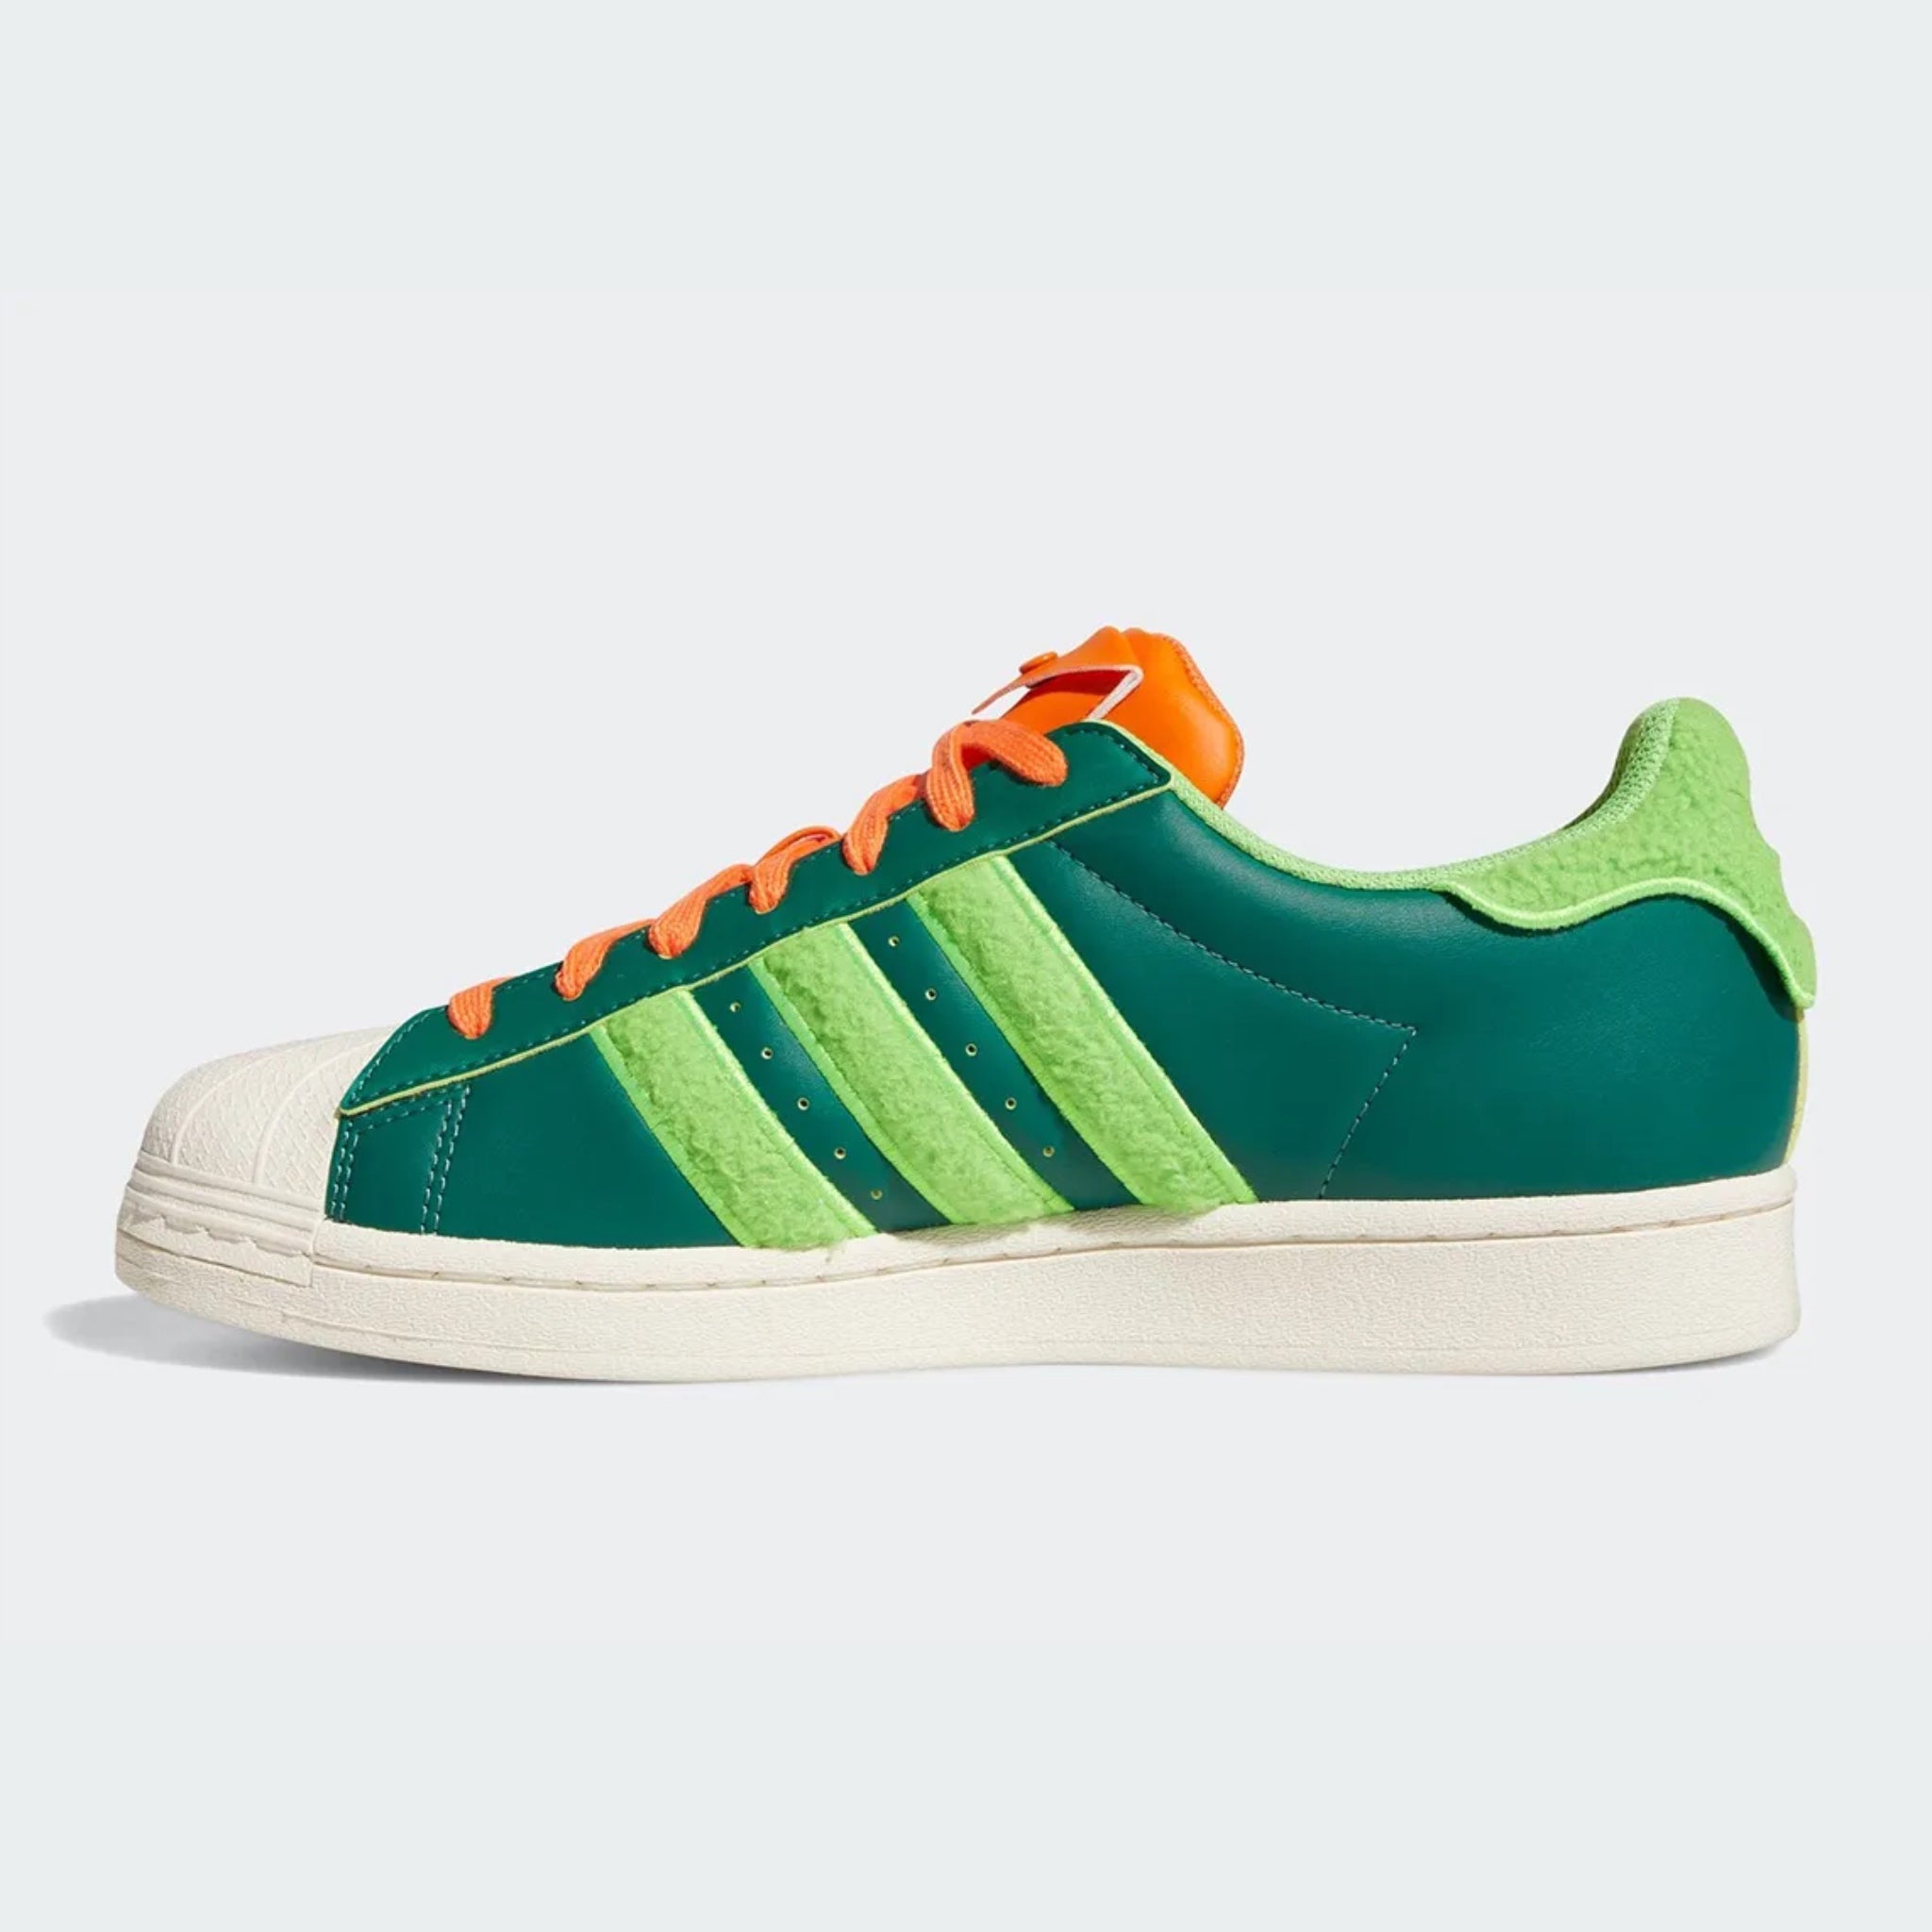 South Park x Adidas Superstar "Kyle" | GY6490 | $299.99 | $299.99 | $299.99 | Shoes | Marching Dogs